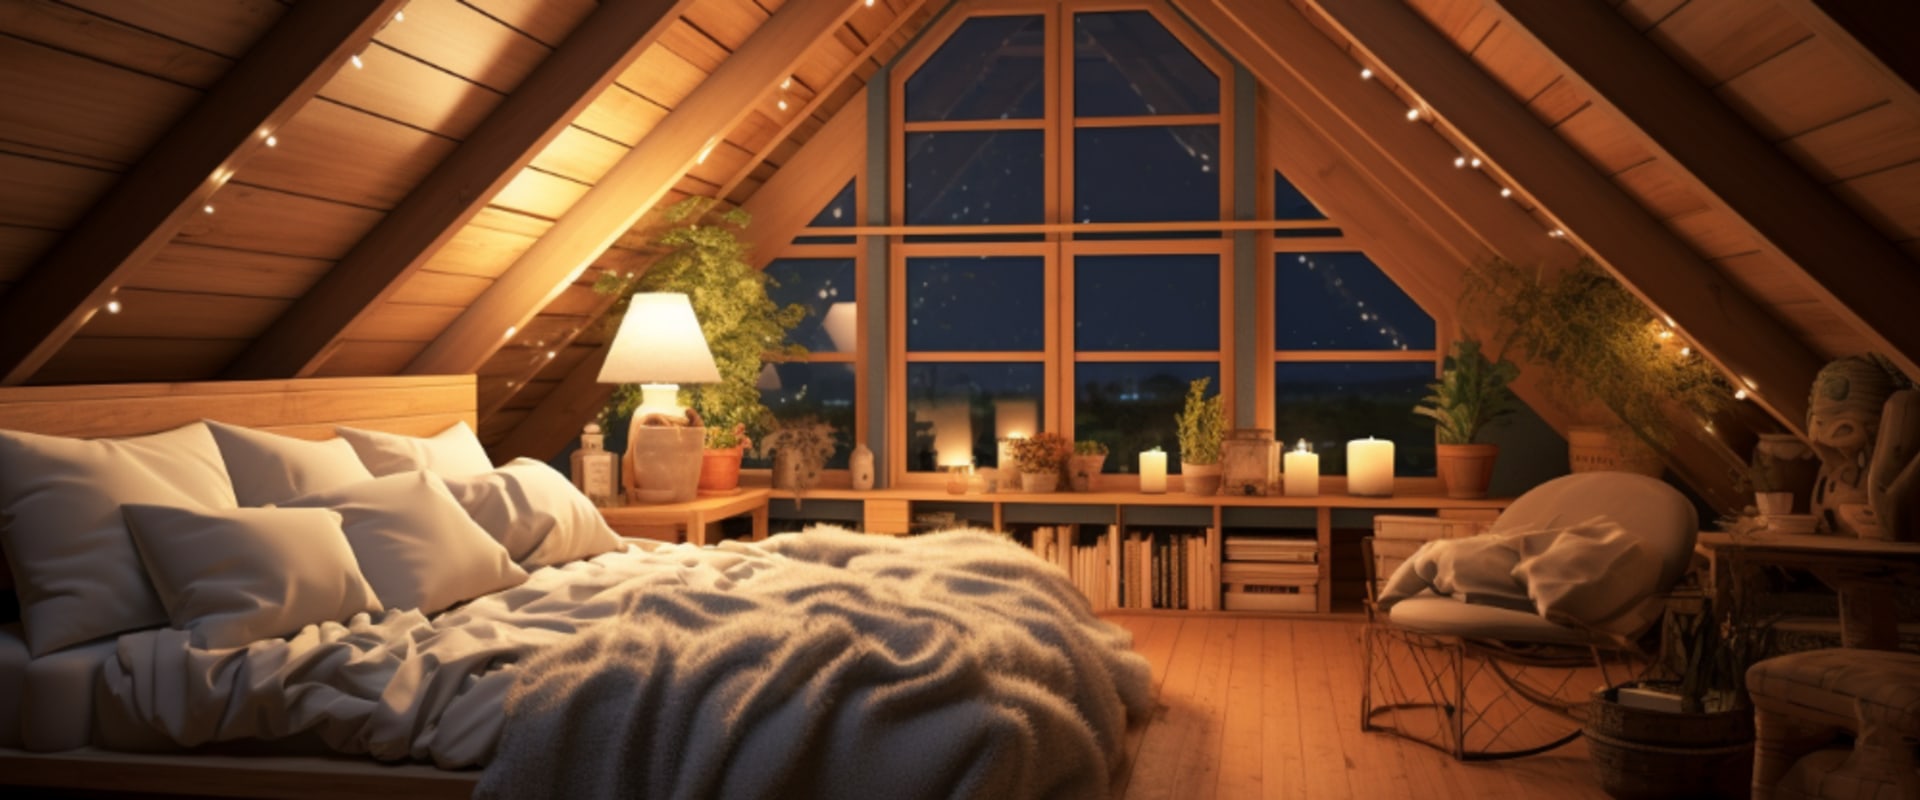 Enhance Your Home Comfort With Attic Insulation Installation Contractors in Palm City FL